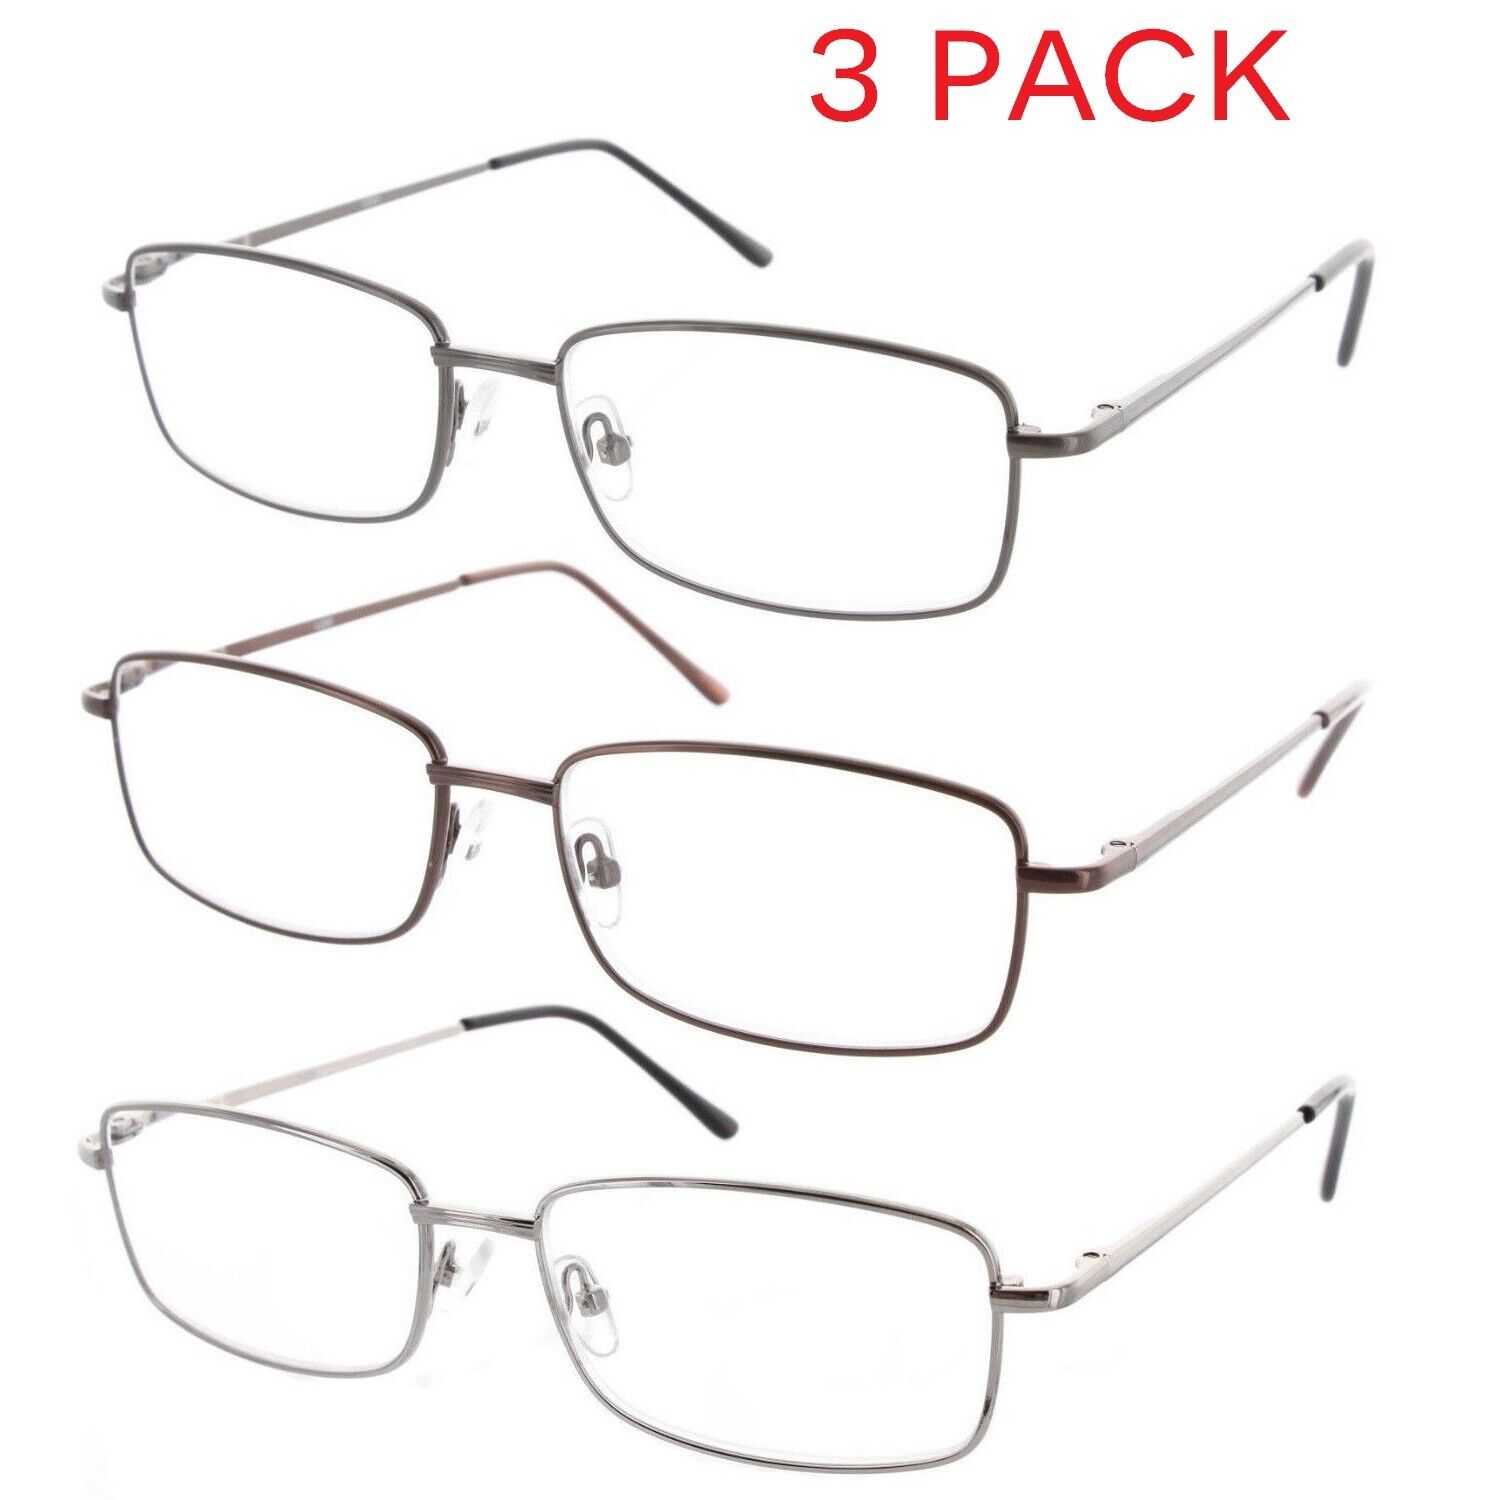 3 Pack Metal Reading Glasses Spring Hinge Readers for Men and Women Fiore Does Not Apply